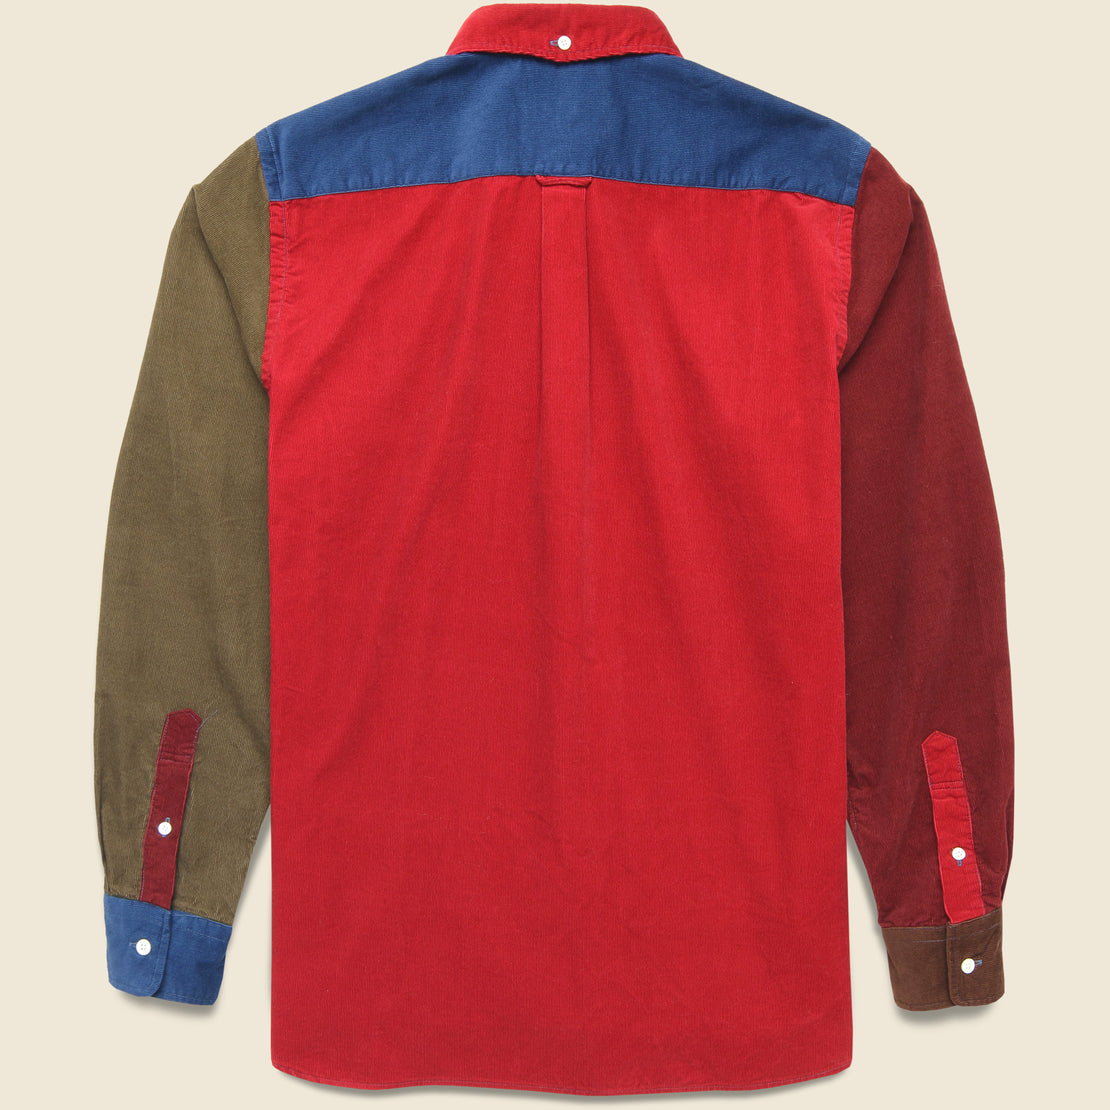 Corduroy Panel Shirt - Red/Multi - BEAMS+ - STAG Provisions - Tops - L/S Woven - Corduroy